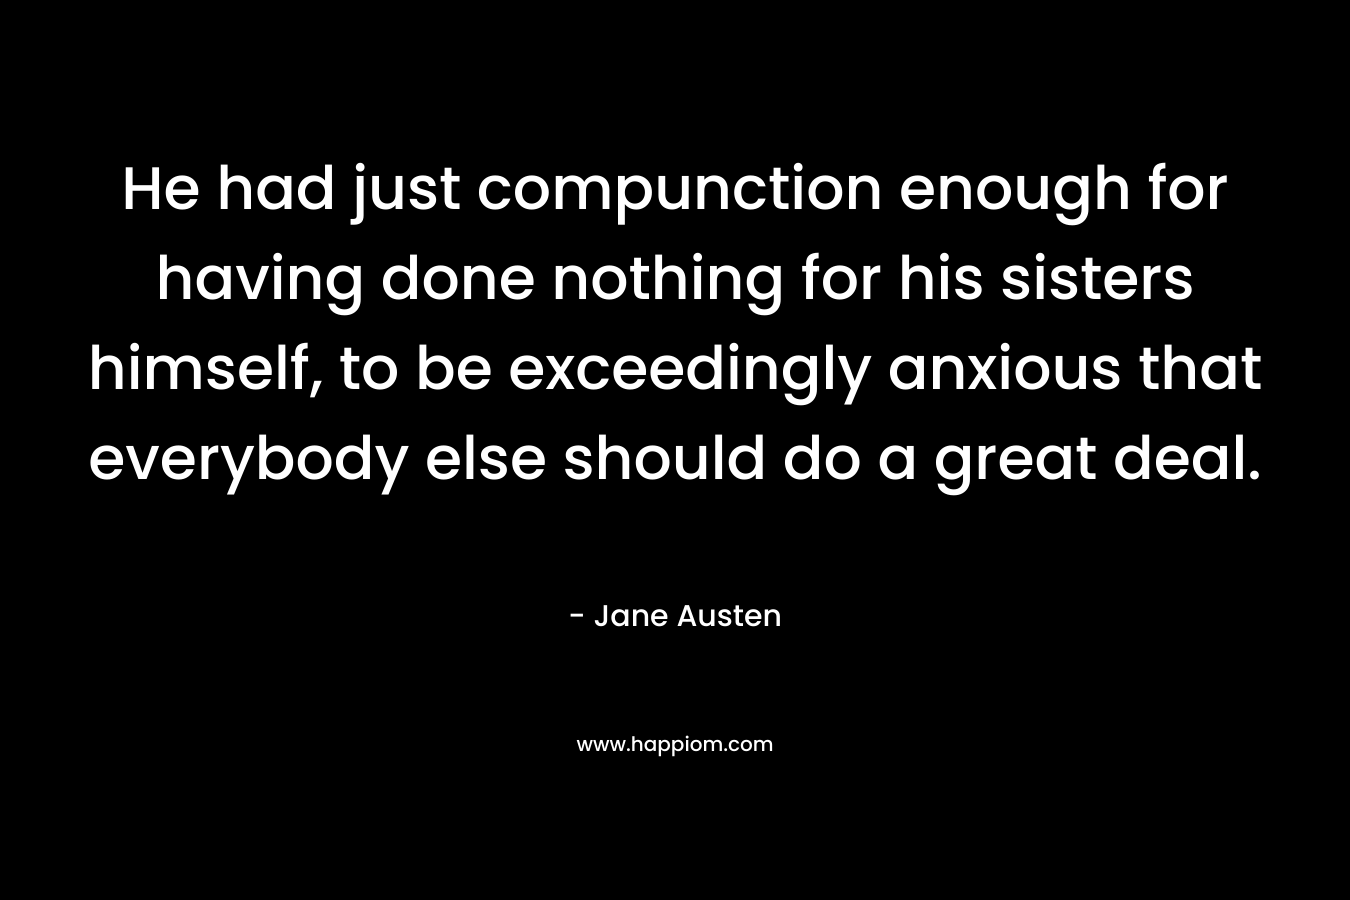 He had just compunction enough for having done nothing for his sisters himself, to be exceedingly anxious that everybody else should do a great deal. – Jane Austen